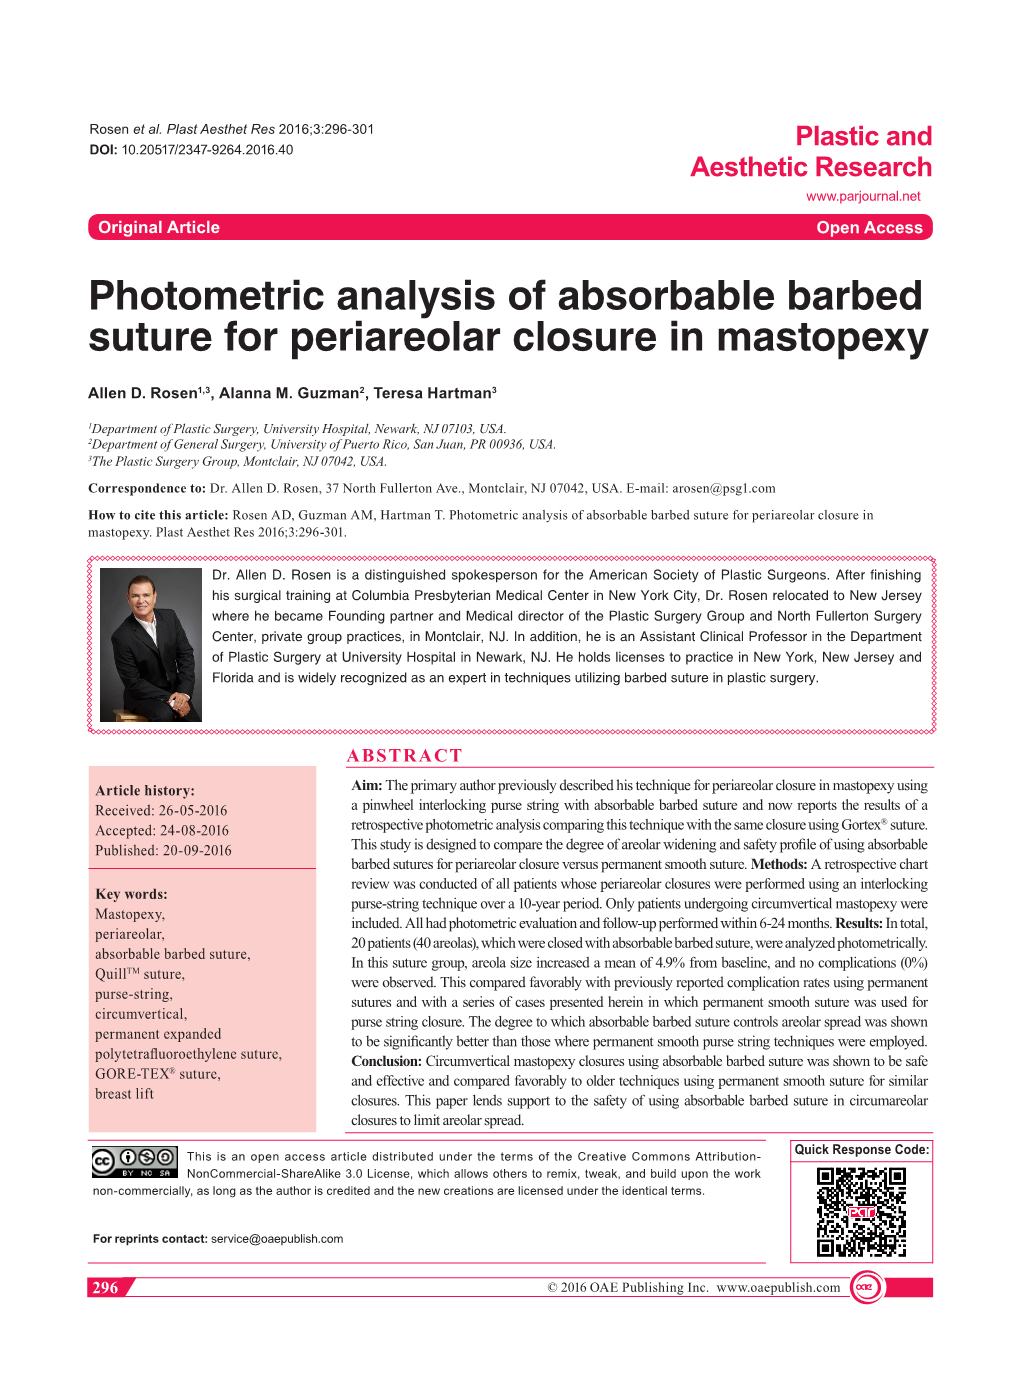 Photometric Analysis of Absorbable Barbed Suture for Periareolar Closure in Mastopexy